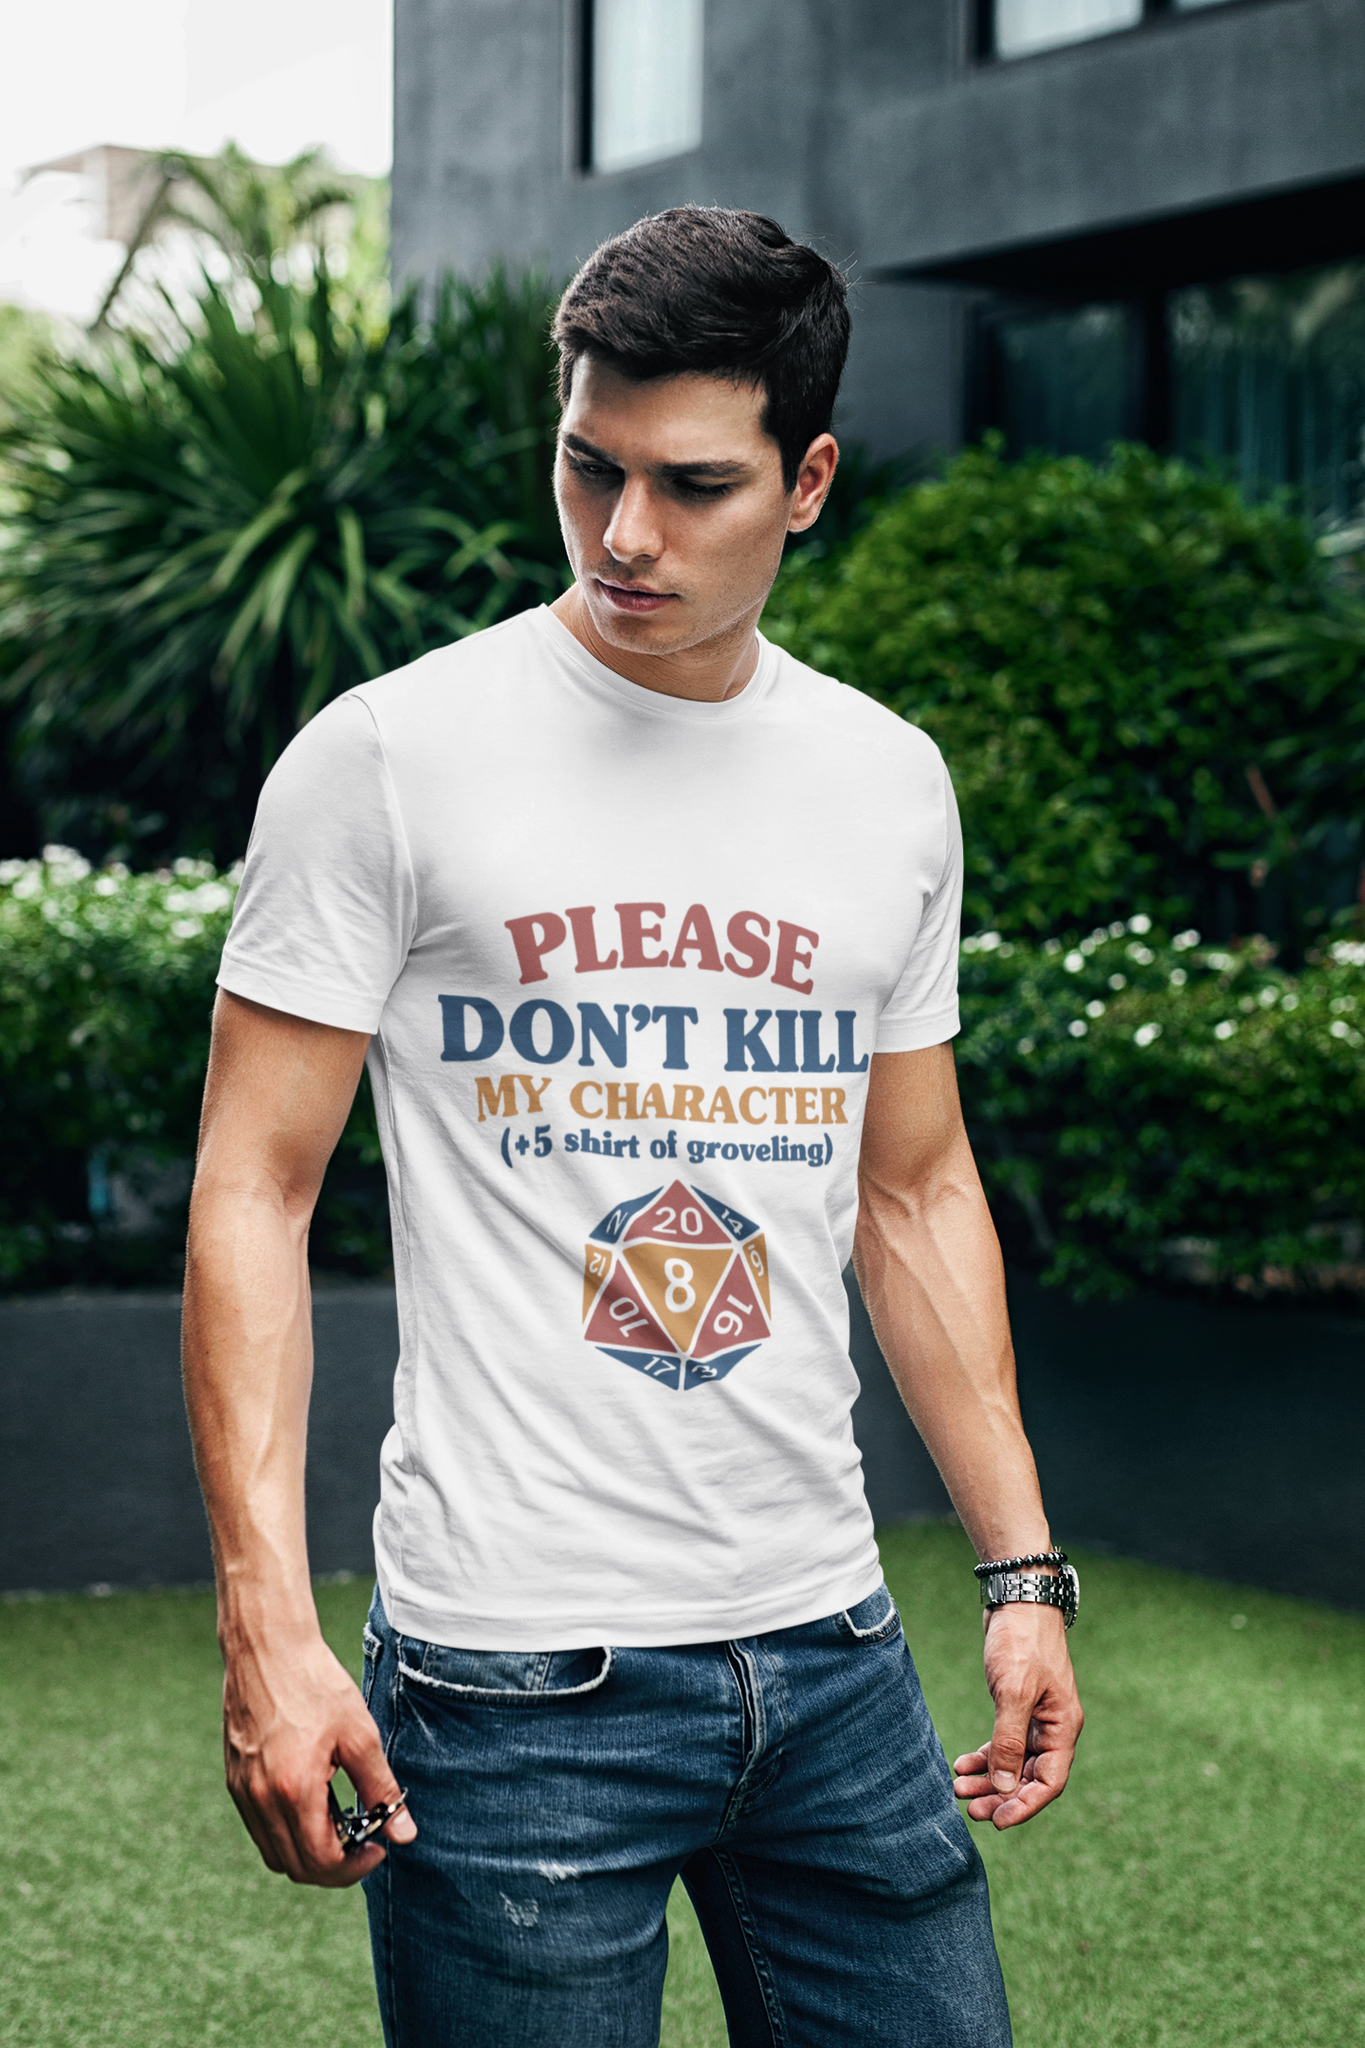 Dungeon And Dragon T Shirt, RPG Dice Games Tshirt, Please Dont Kill My Character T Shirt